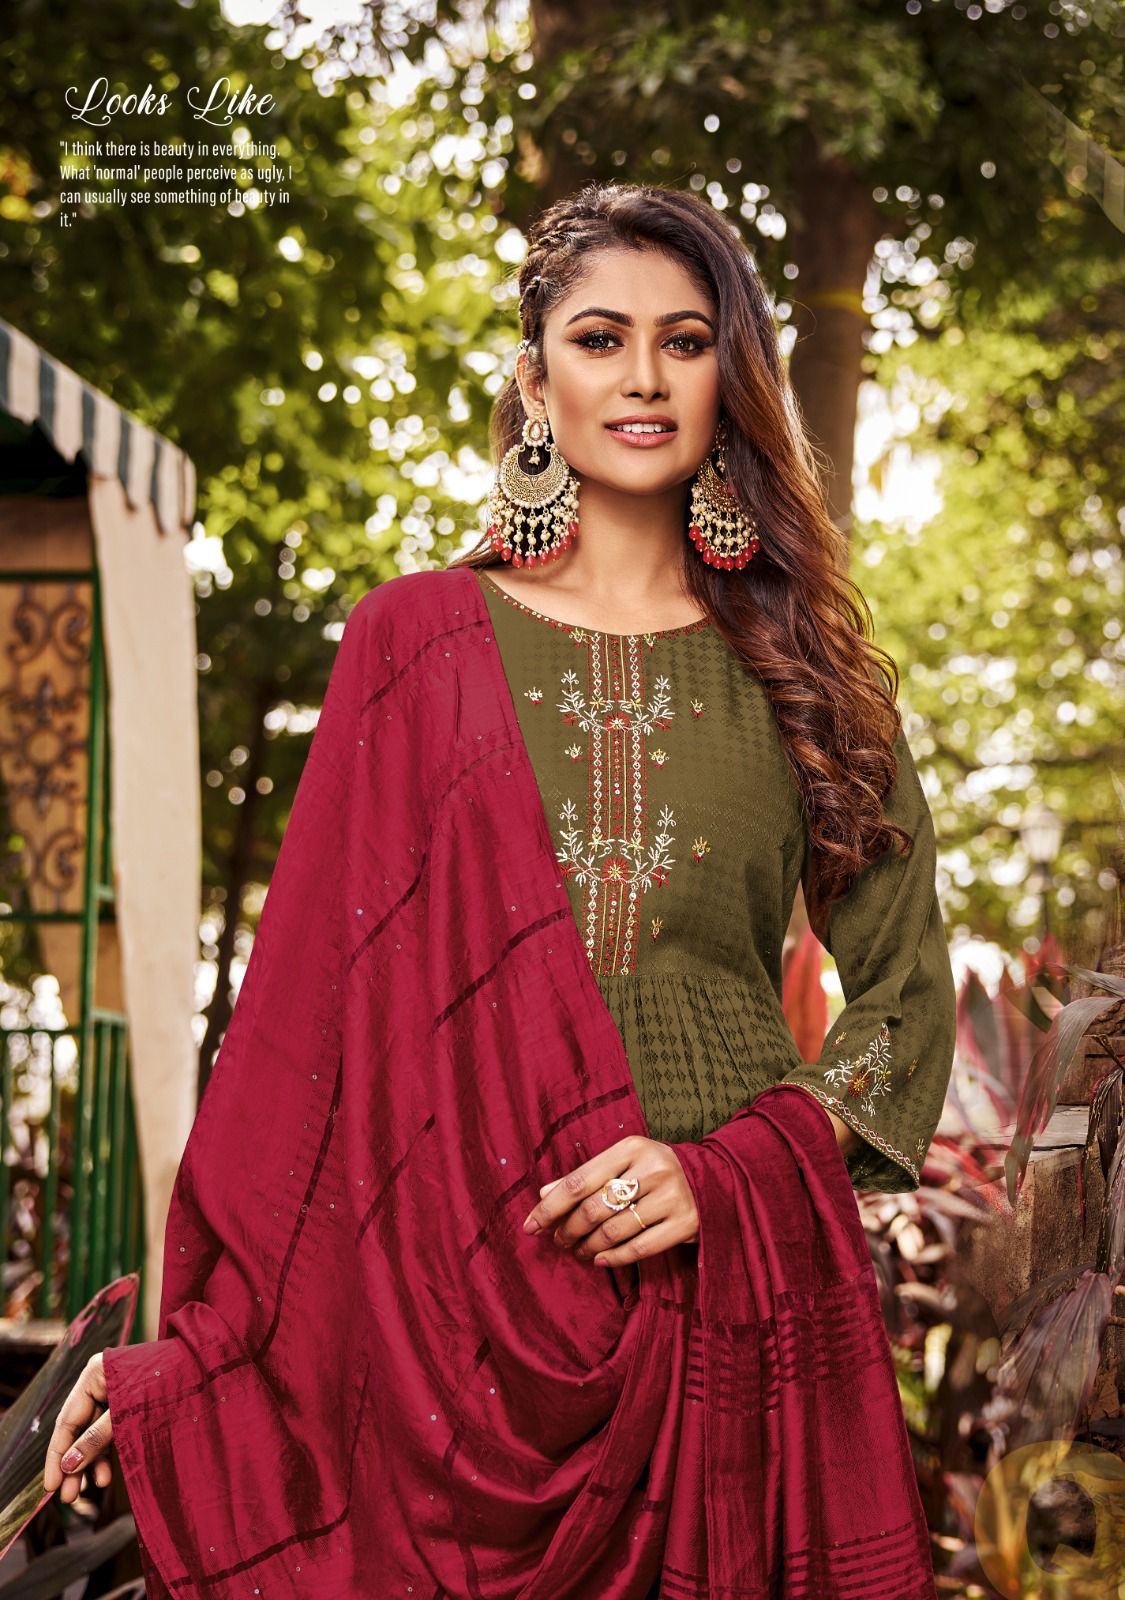 Surabhi Ladies Flavour Rayon Readymade Pant Style Suits